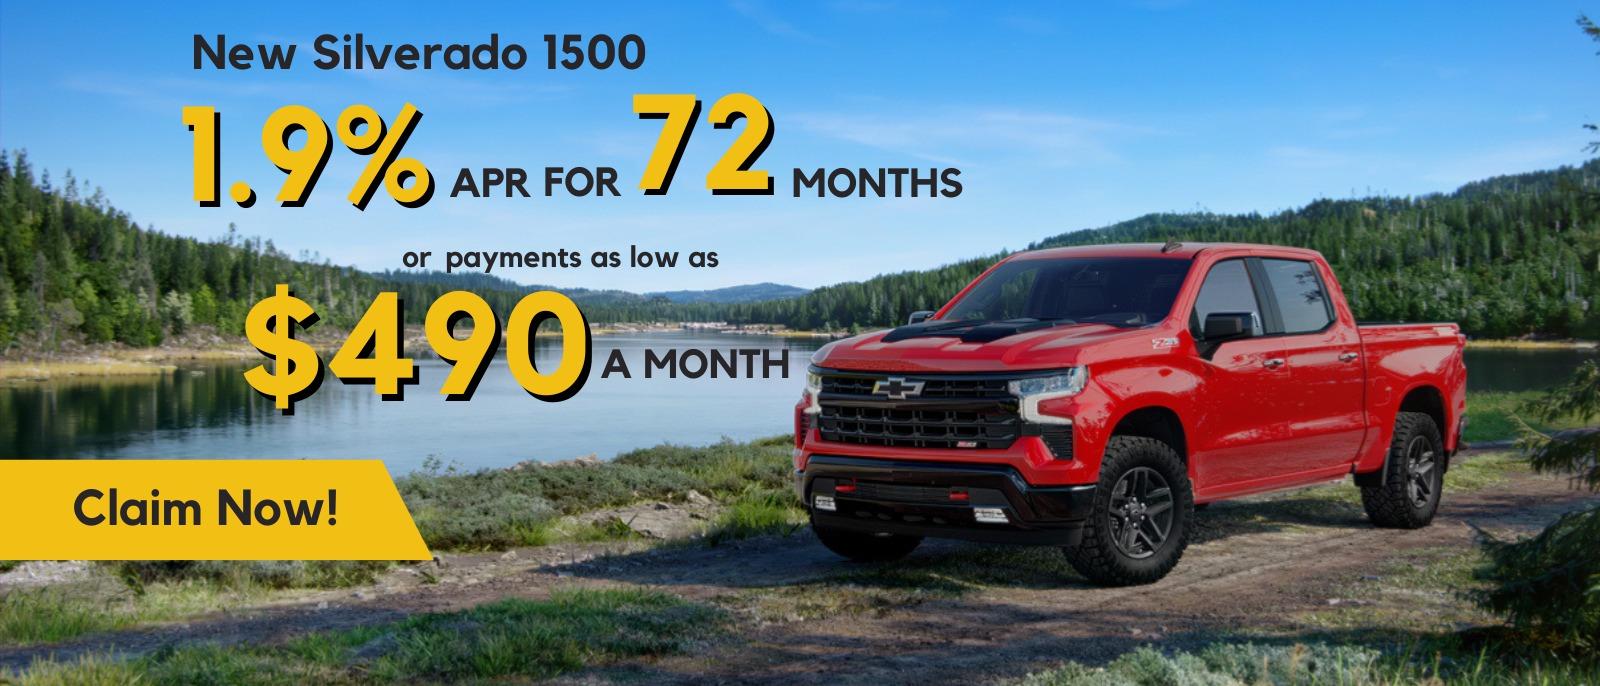 1.9% for 72 months or payments as low as $490 a month